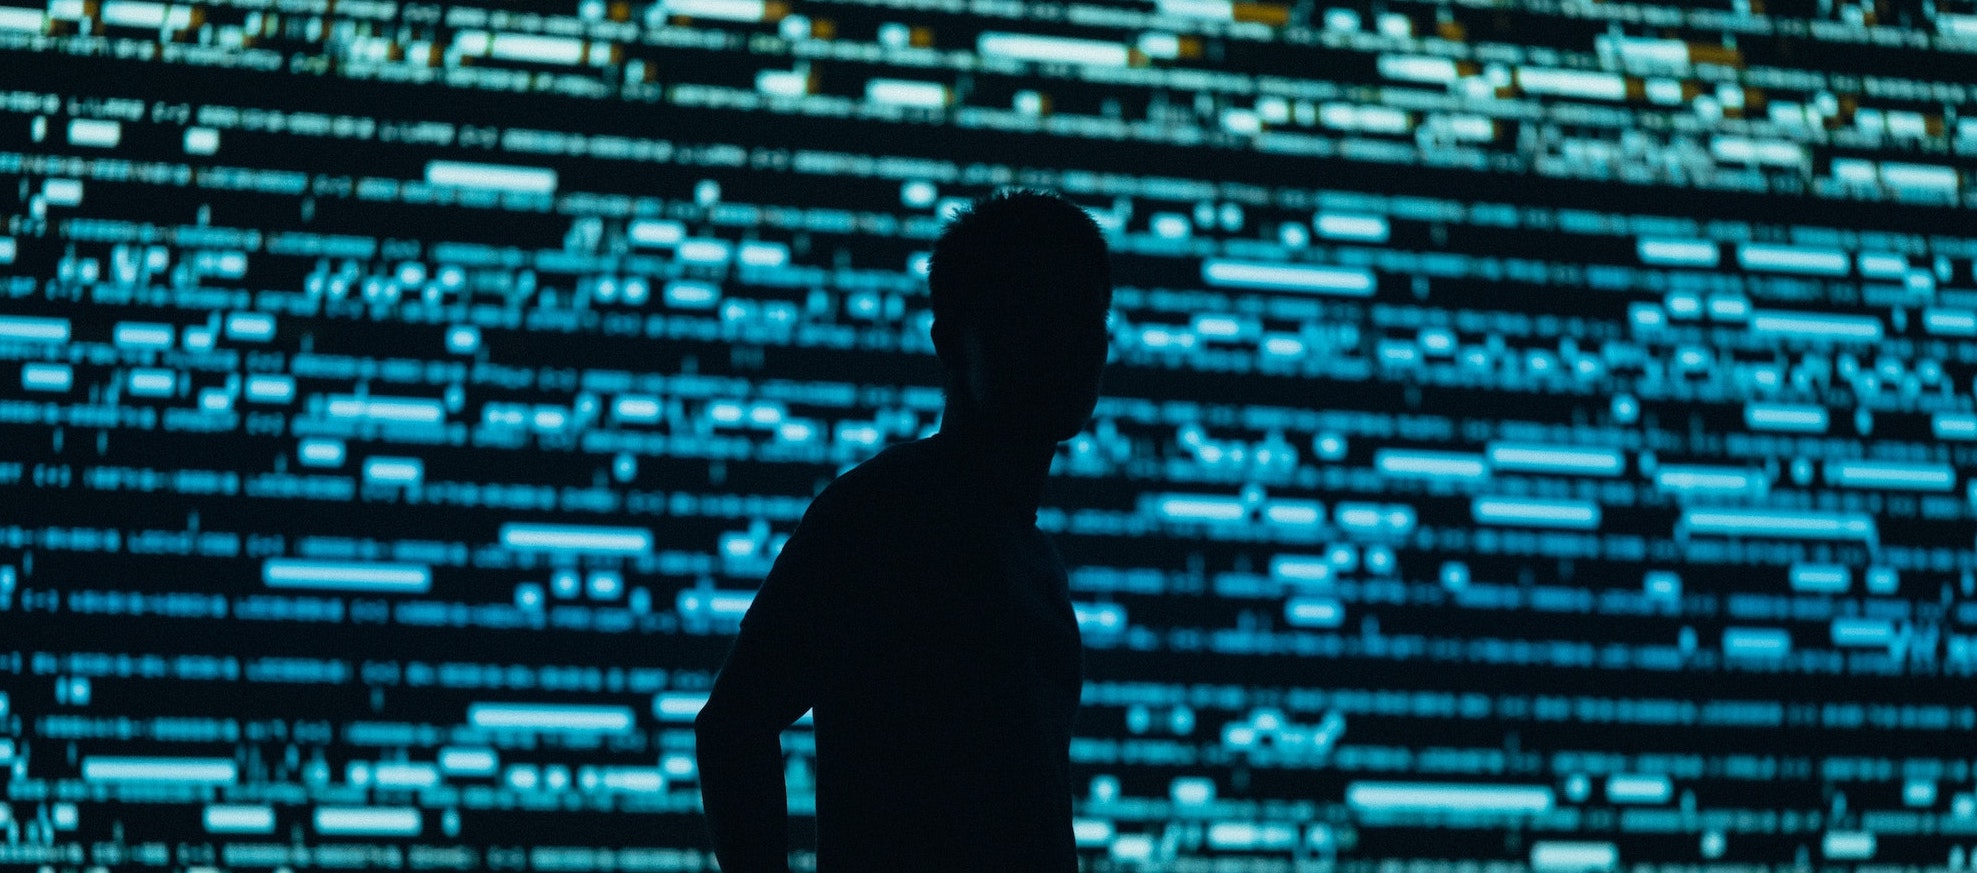 Man in front of screen of code